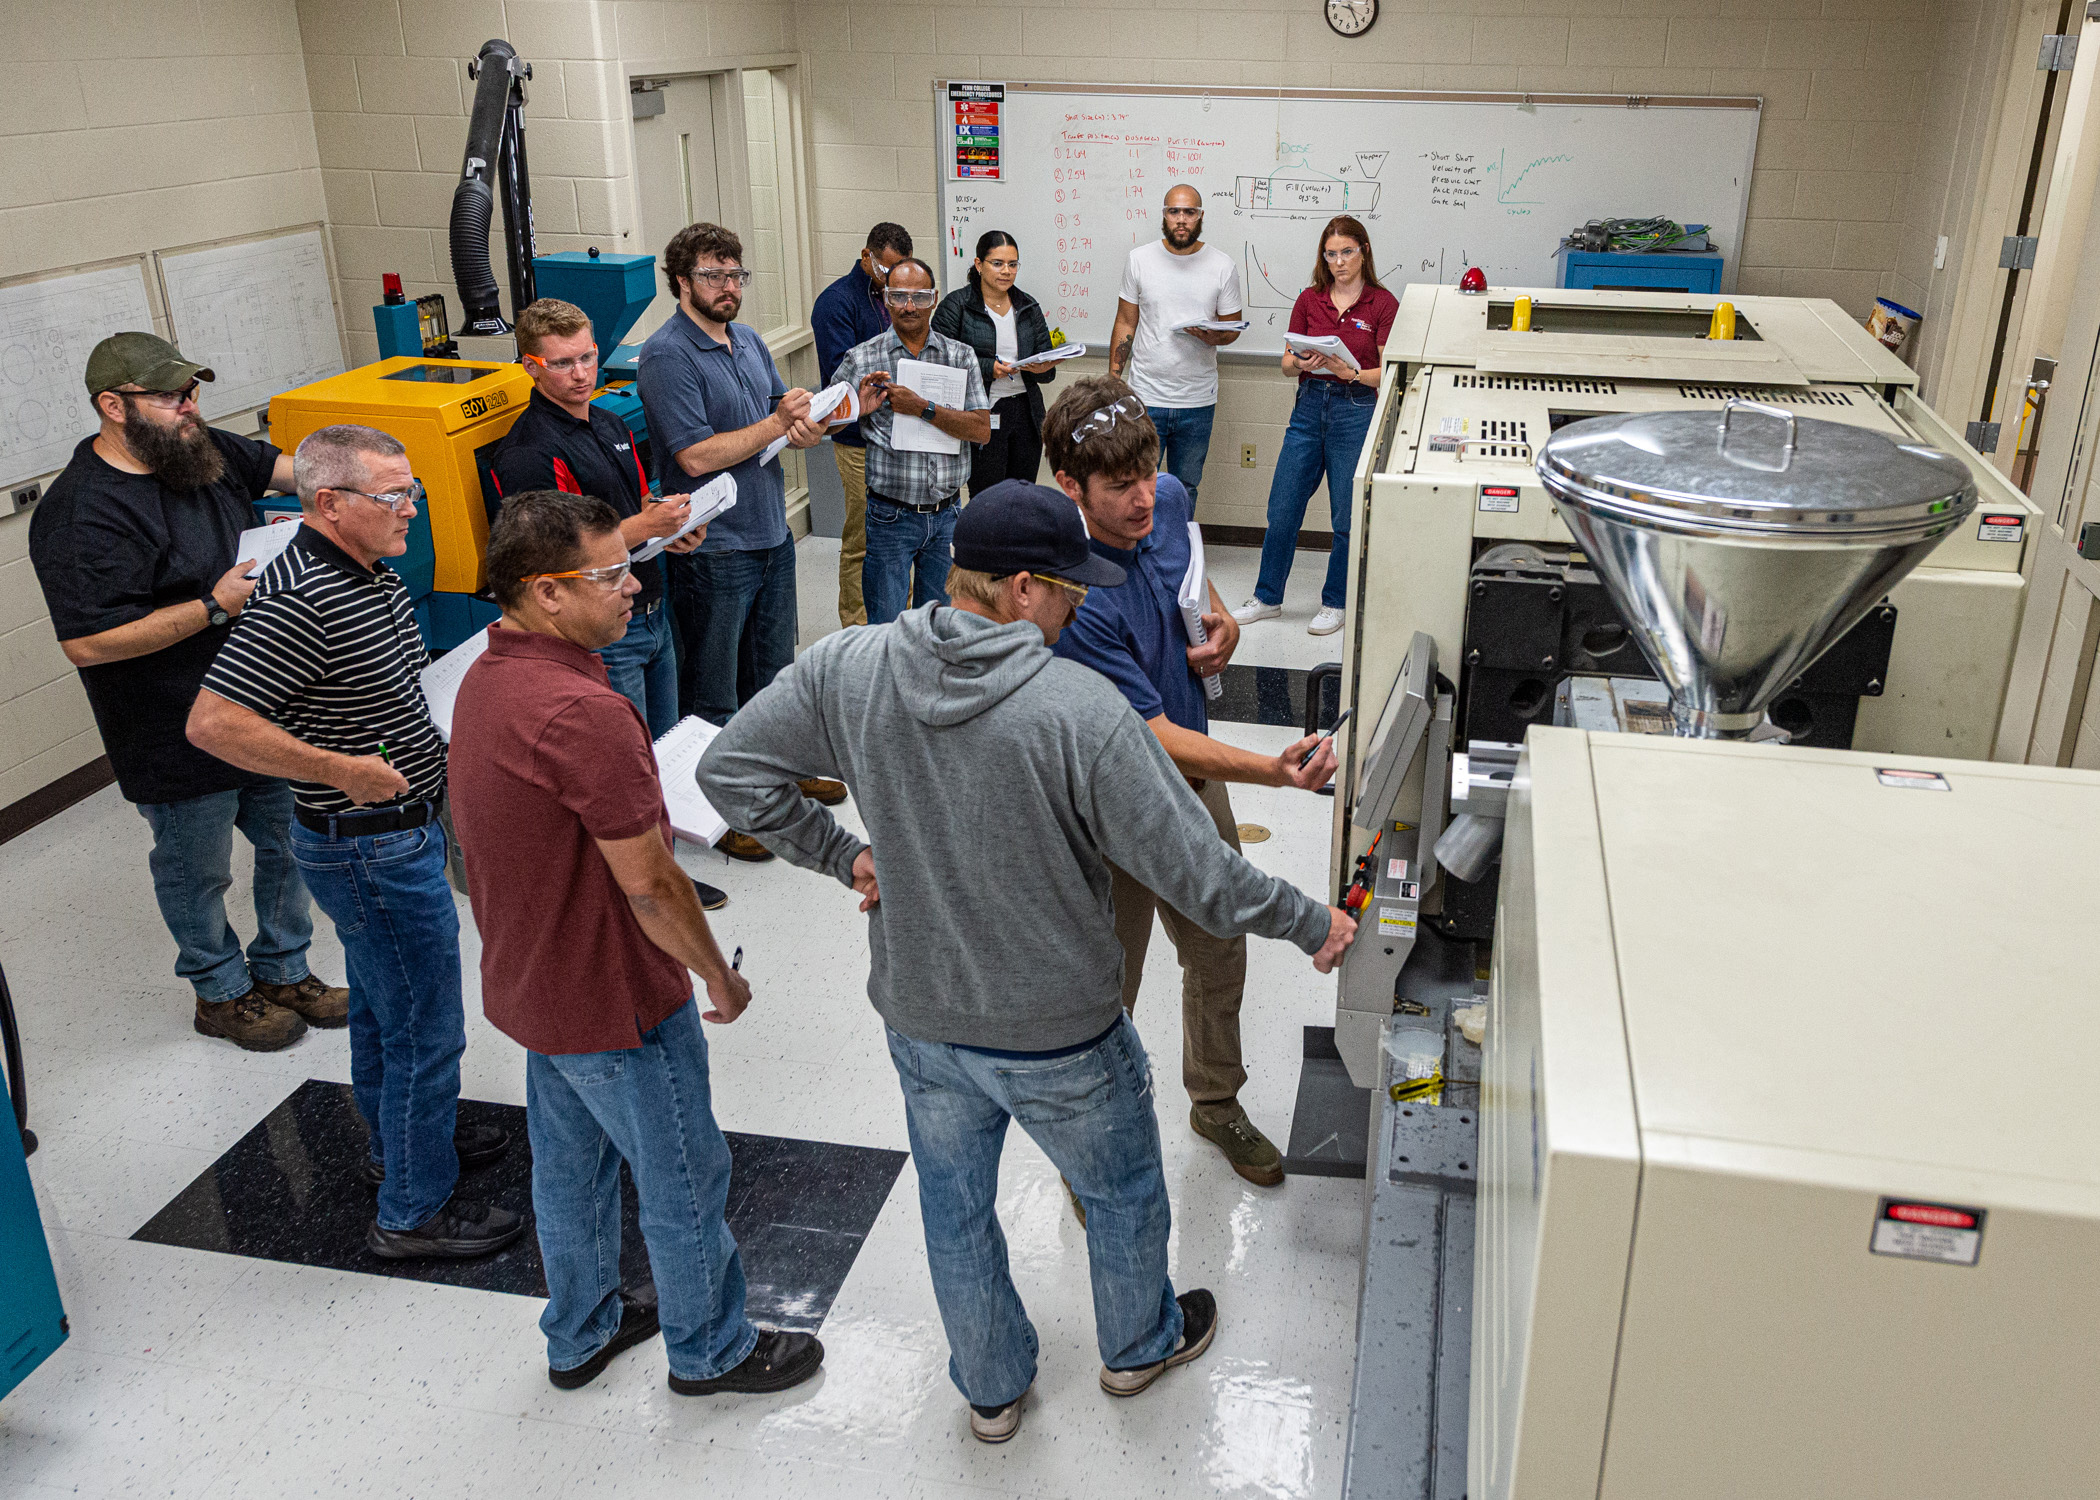 Injection Molding Processing Series continues at Penn College